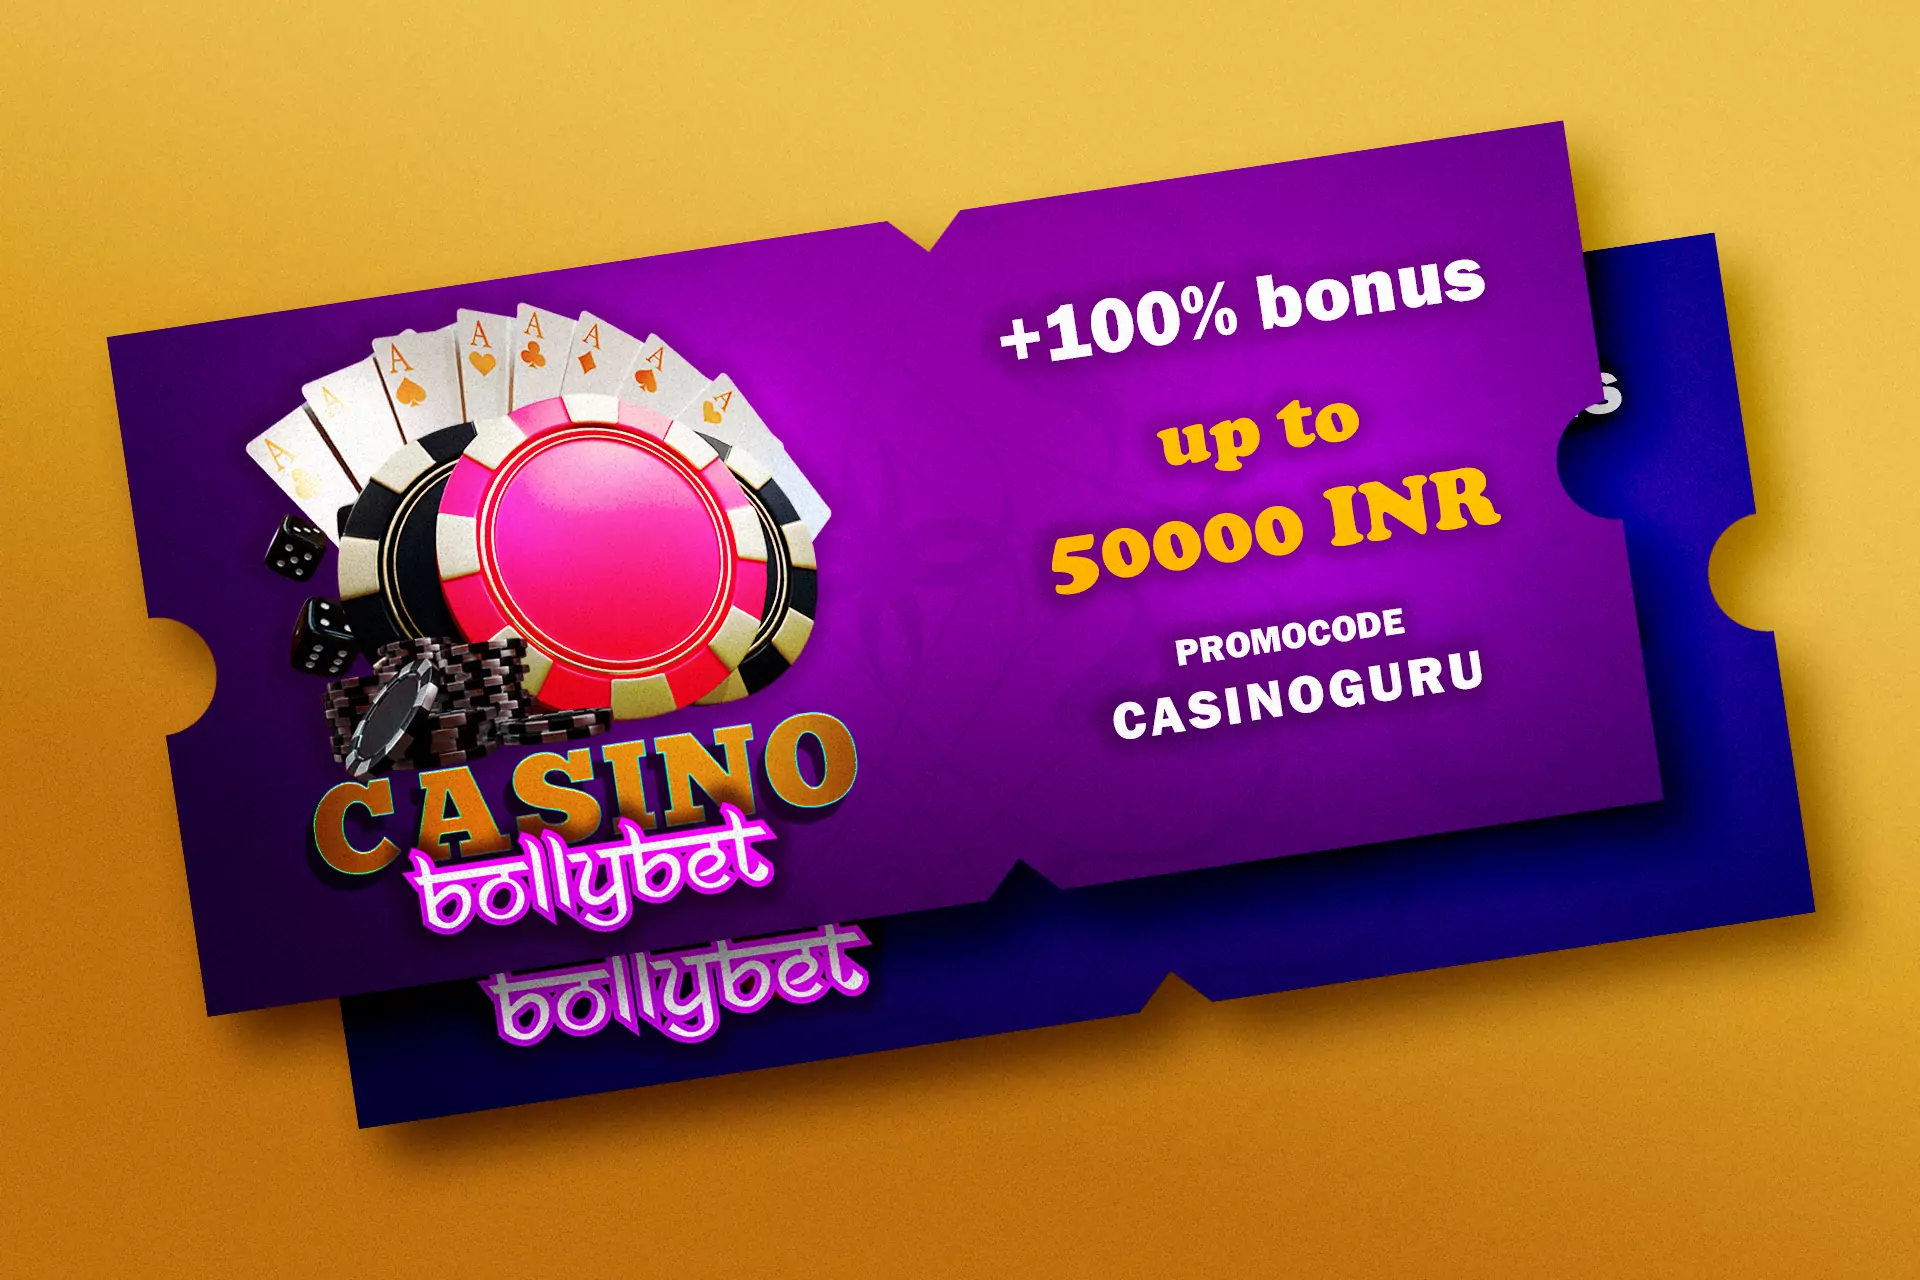 bollybet india: online casino and cricket betting, bonus up to inr 50,000